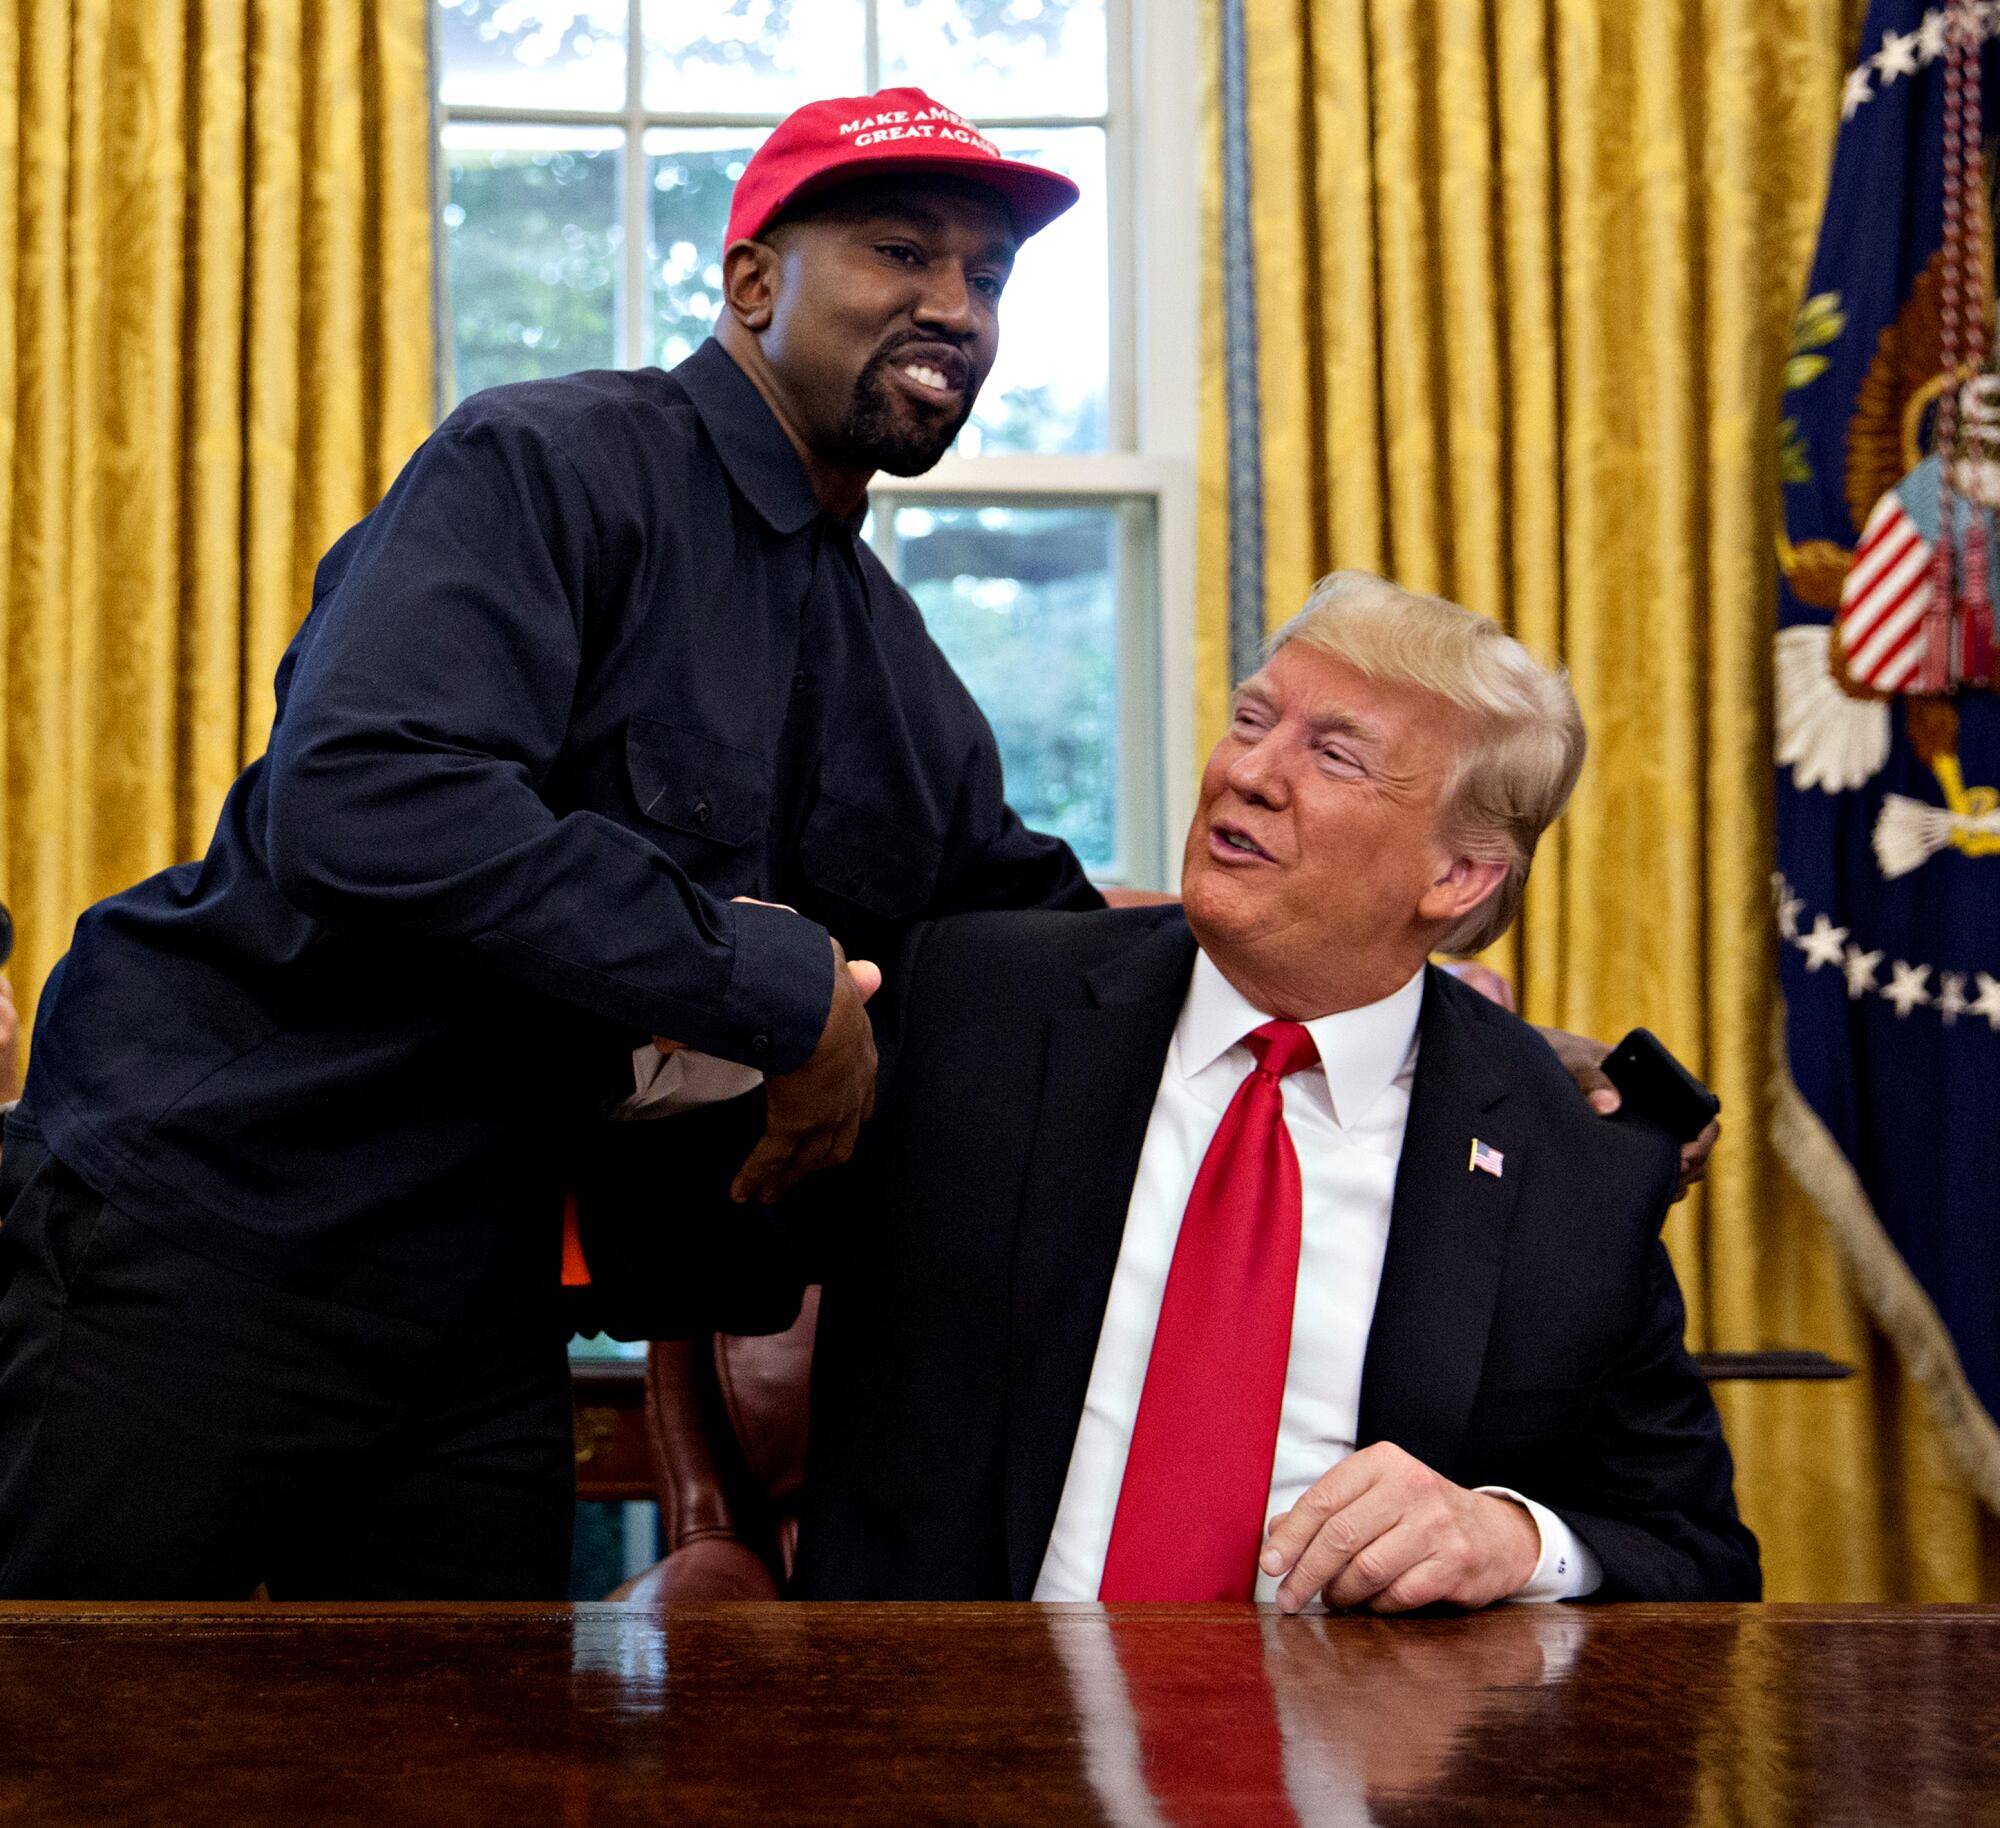 A rapper meets with the president of the United States at the White House.